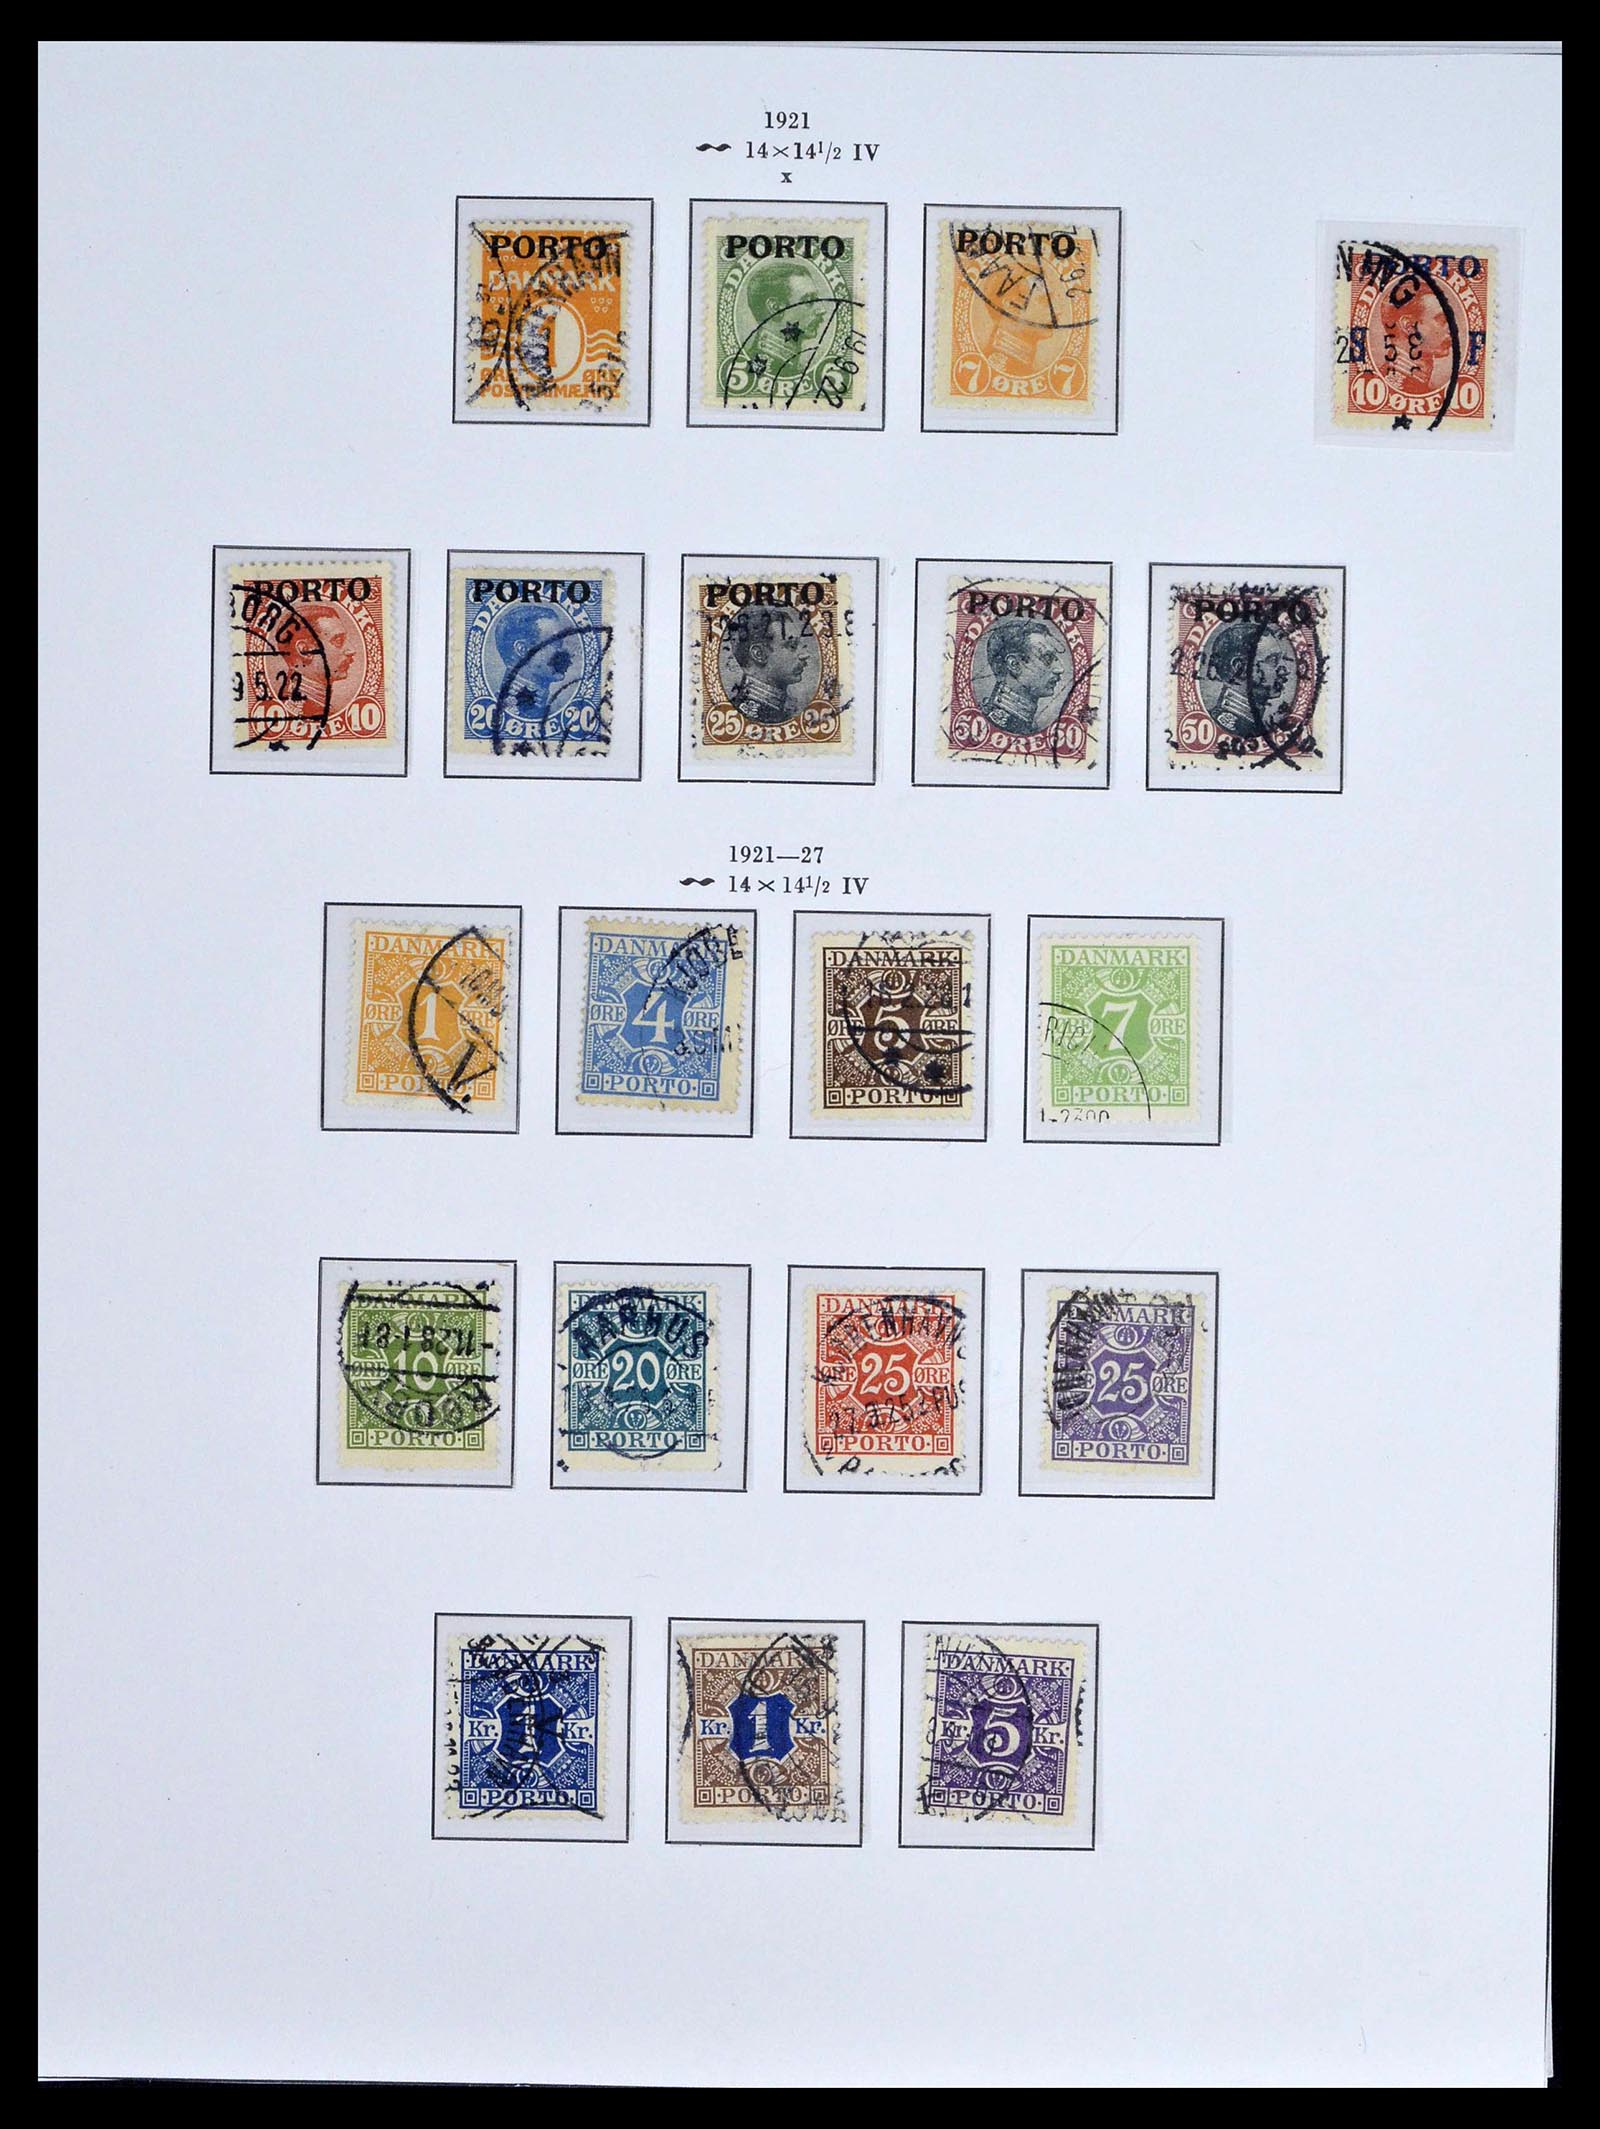 39407 0049 - Stamp collection 39407 Denmark 1851-1969.